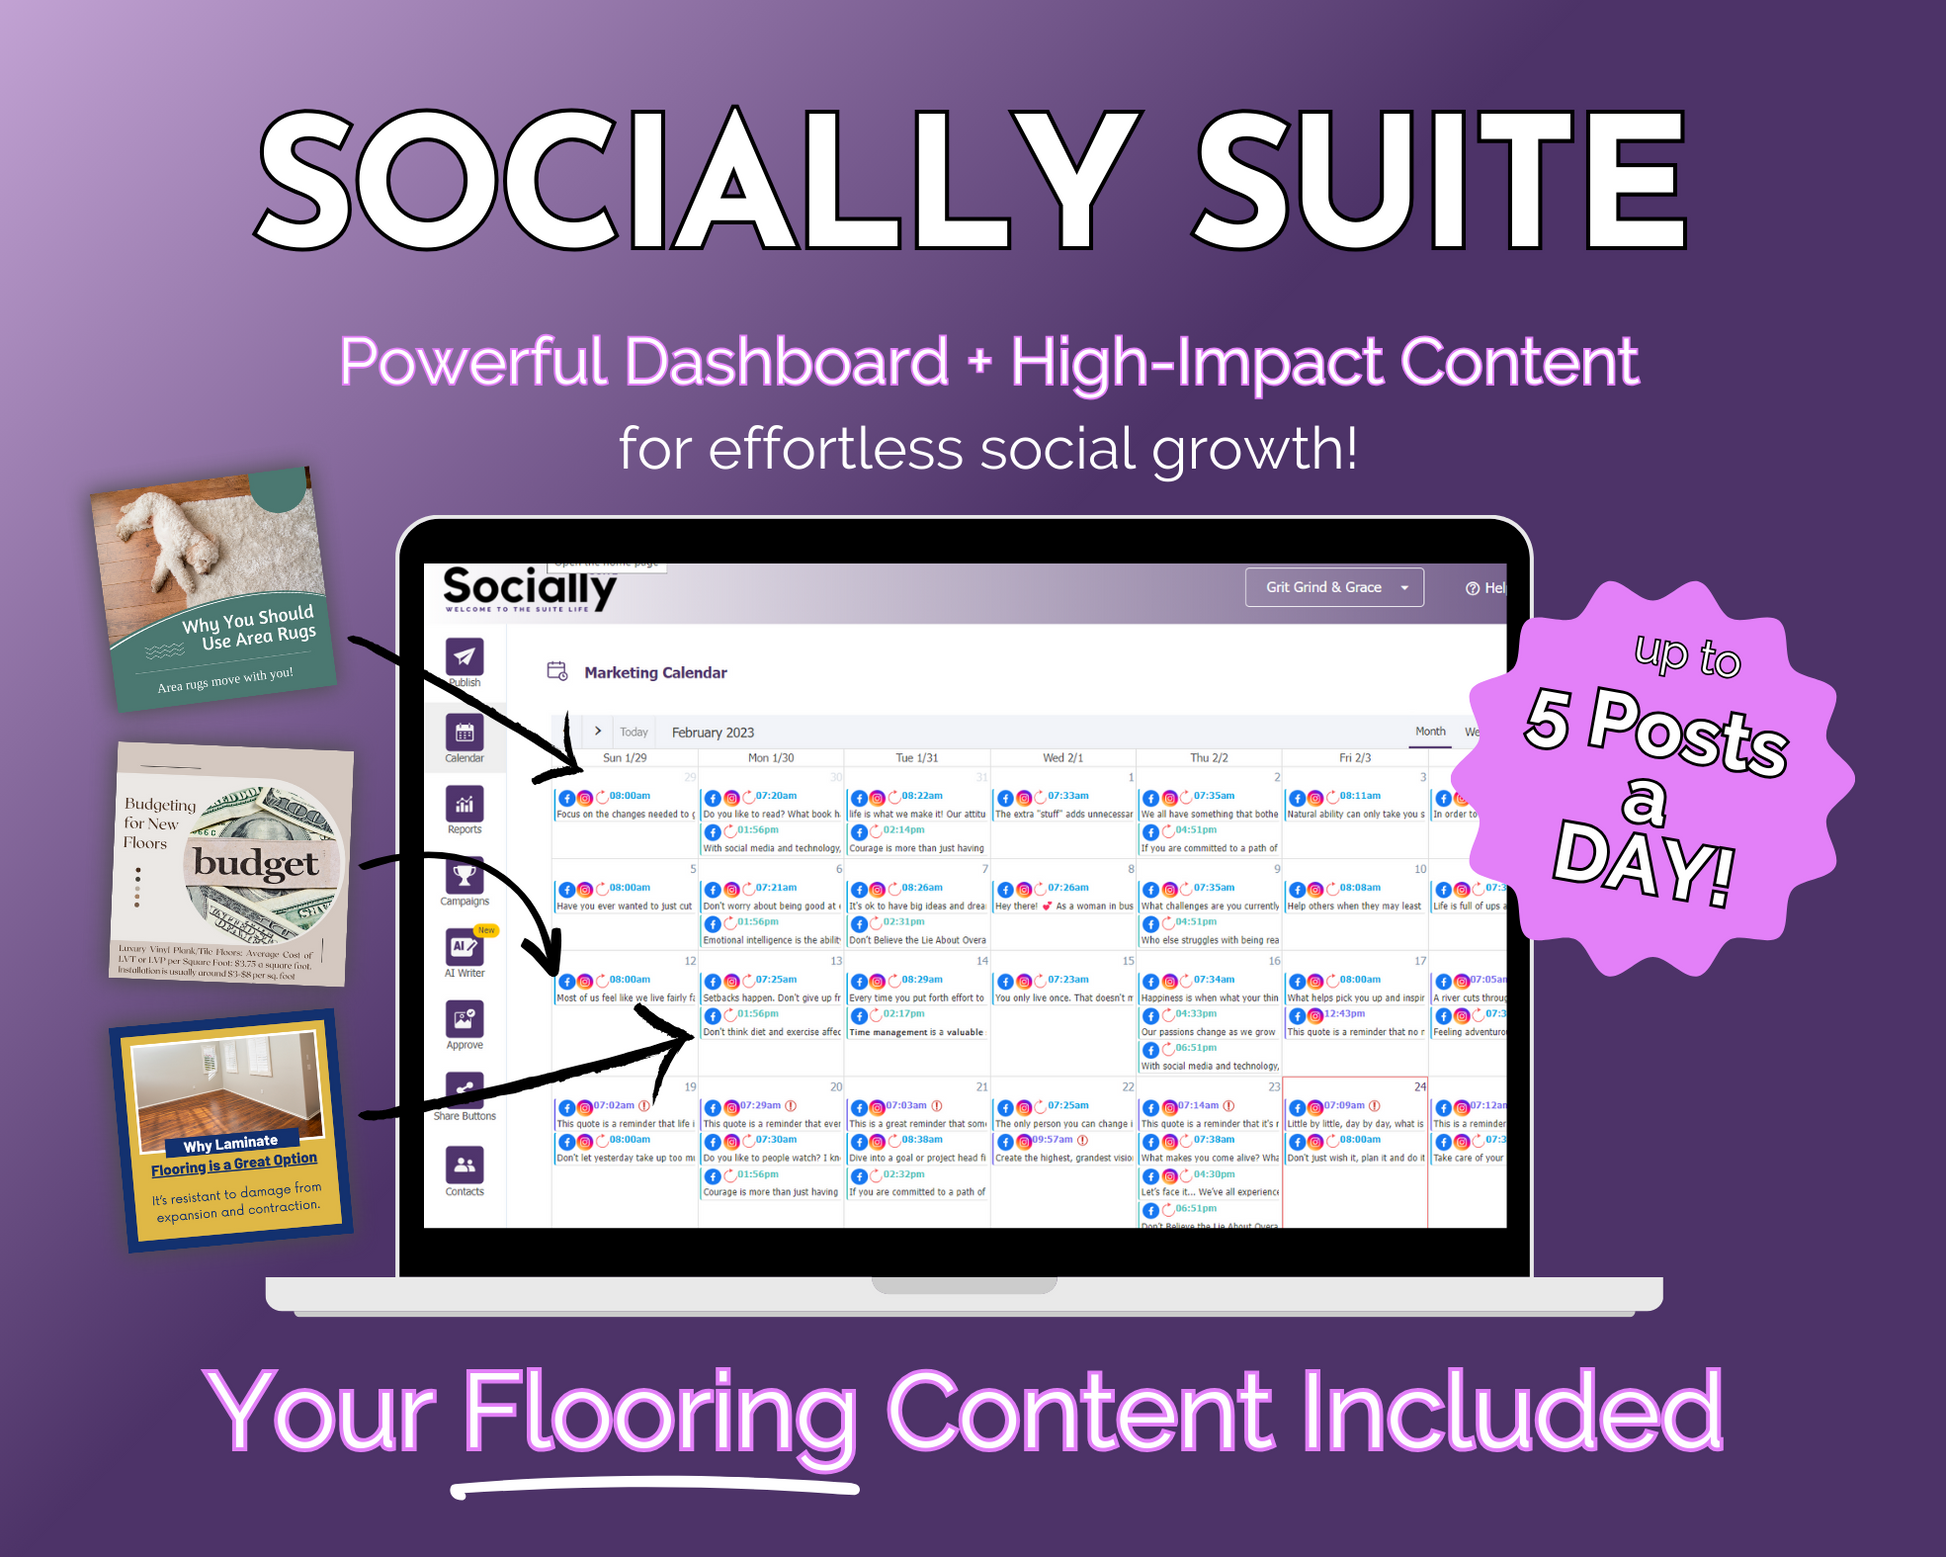 Get Socially Inclined's powerful content management dashboard includes high-quality Socially Suite Membership content.